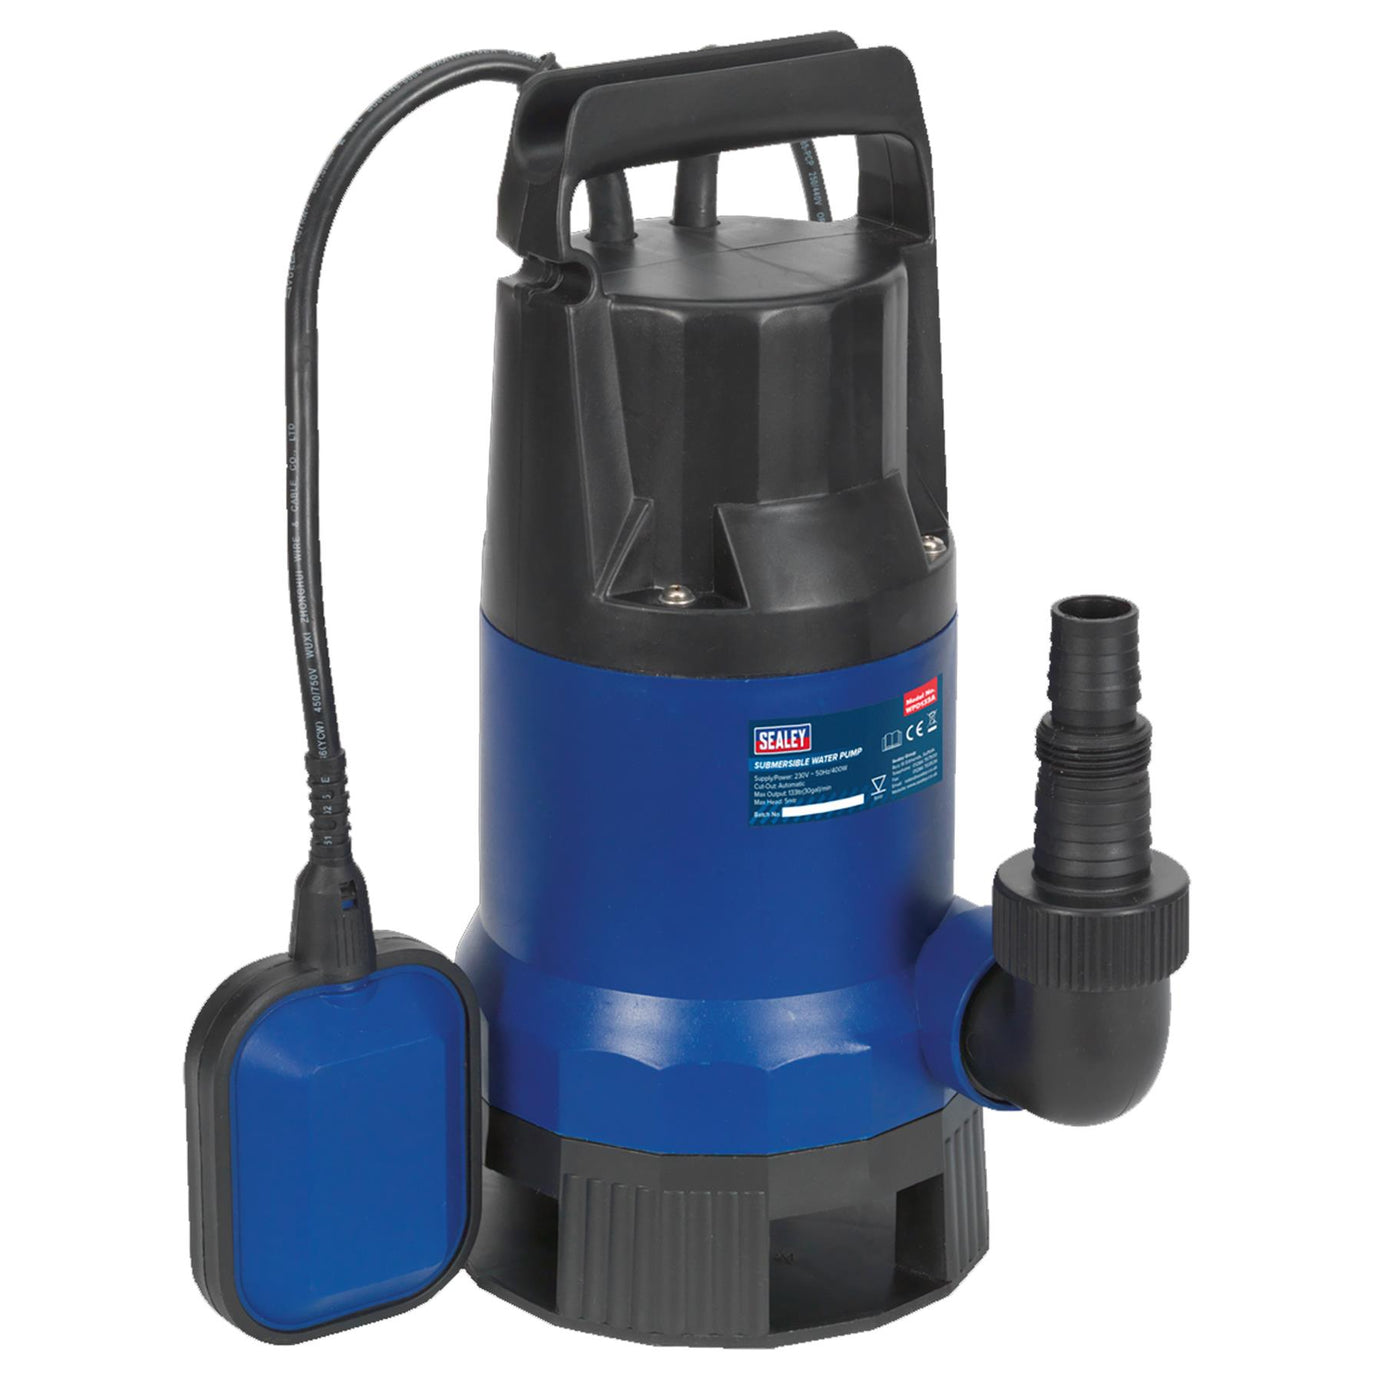 Submersible Dirty Water Pump Automatic 133L/min 230V Sealey